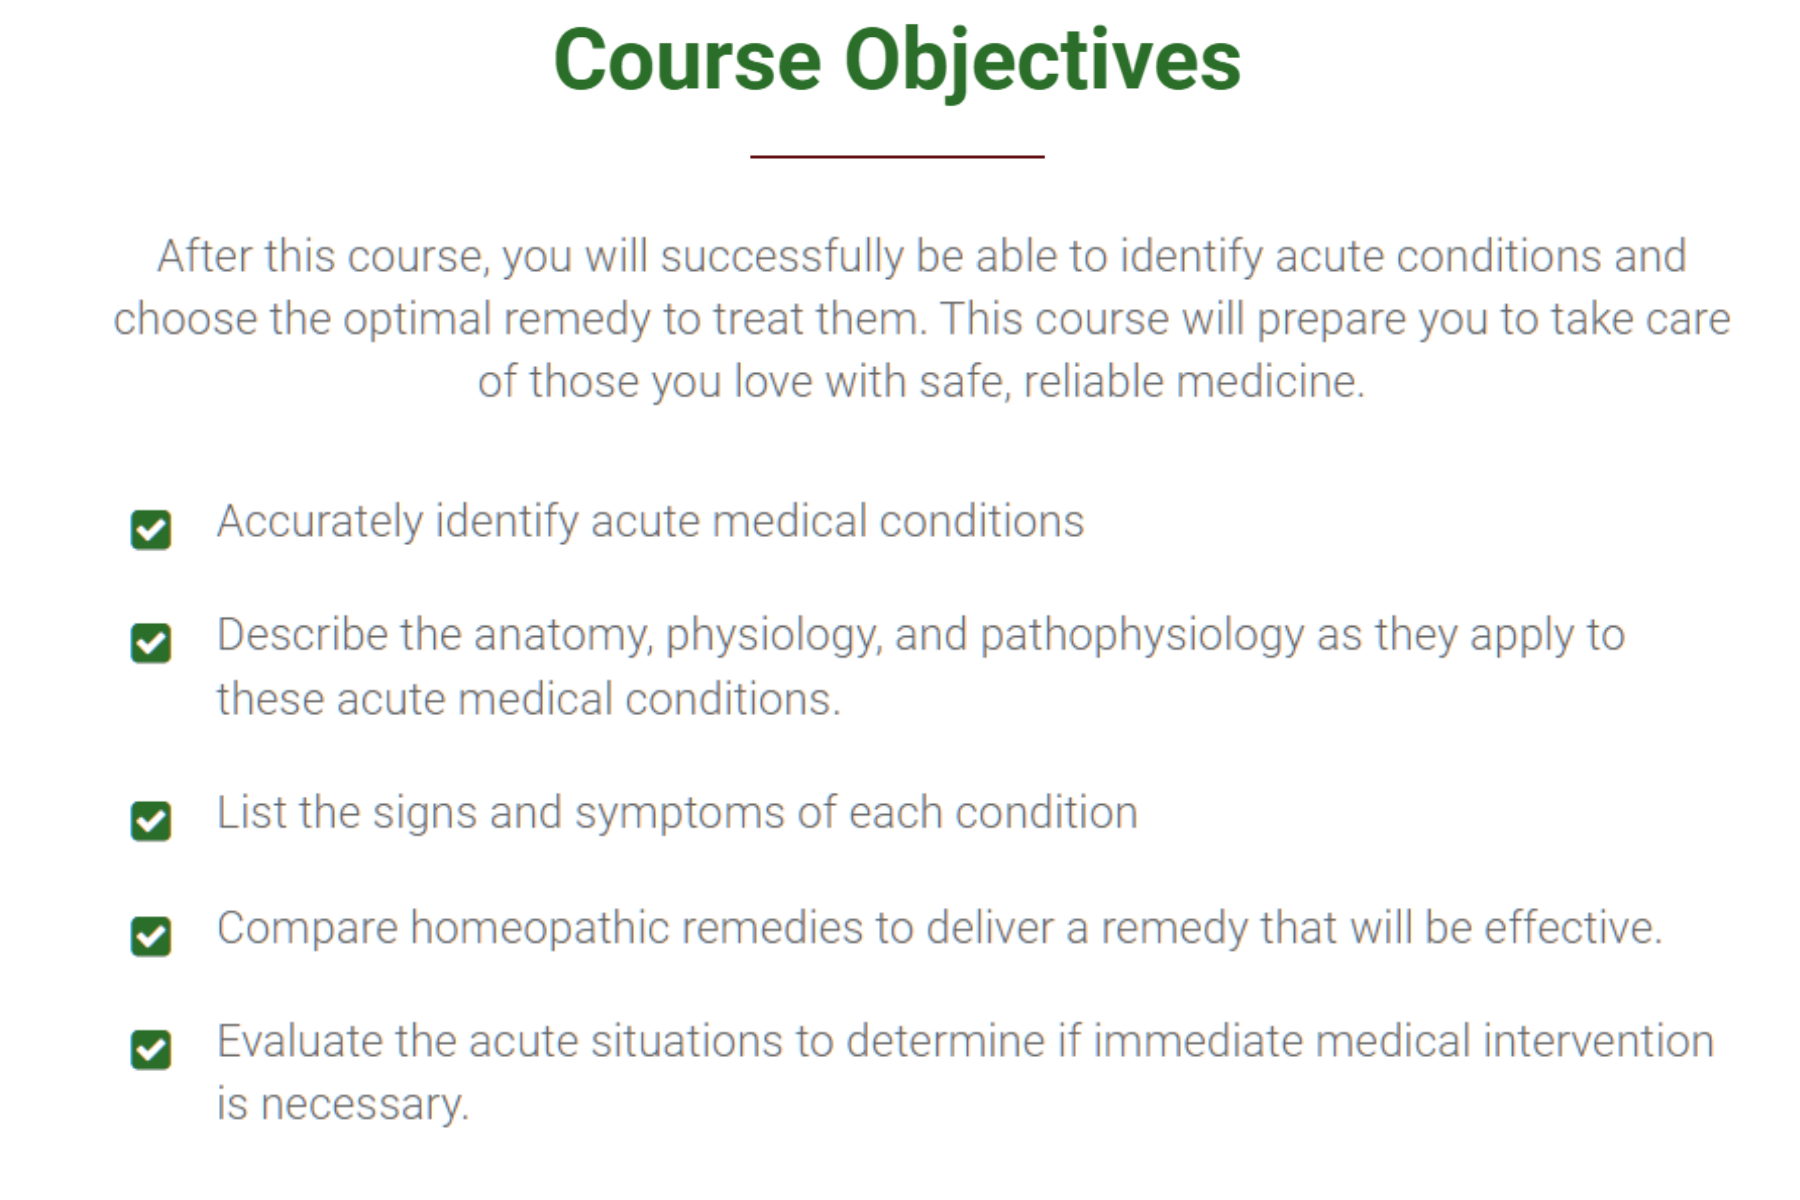 Course objectives: After this course, you will successfully be able to identify acute conditions and choose the optimal remedy to treat them. This course will prepare you to take care of those you love with safe, reliable medicine.